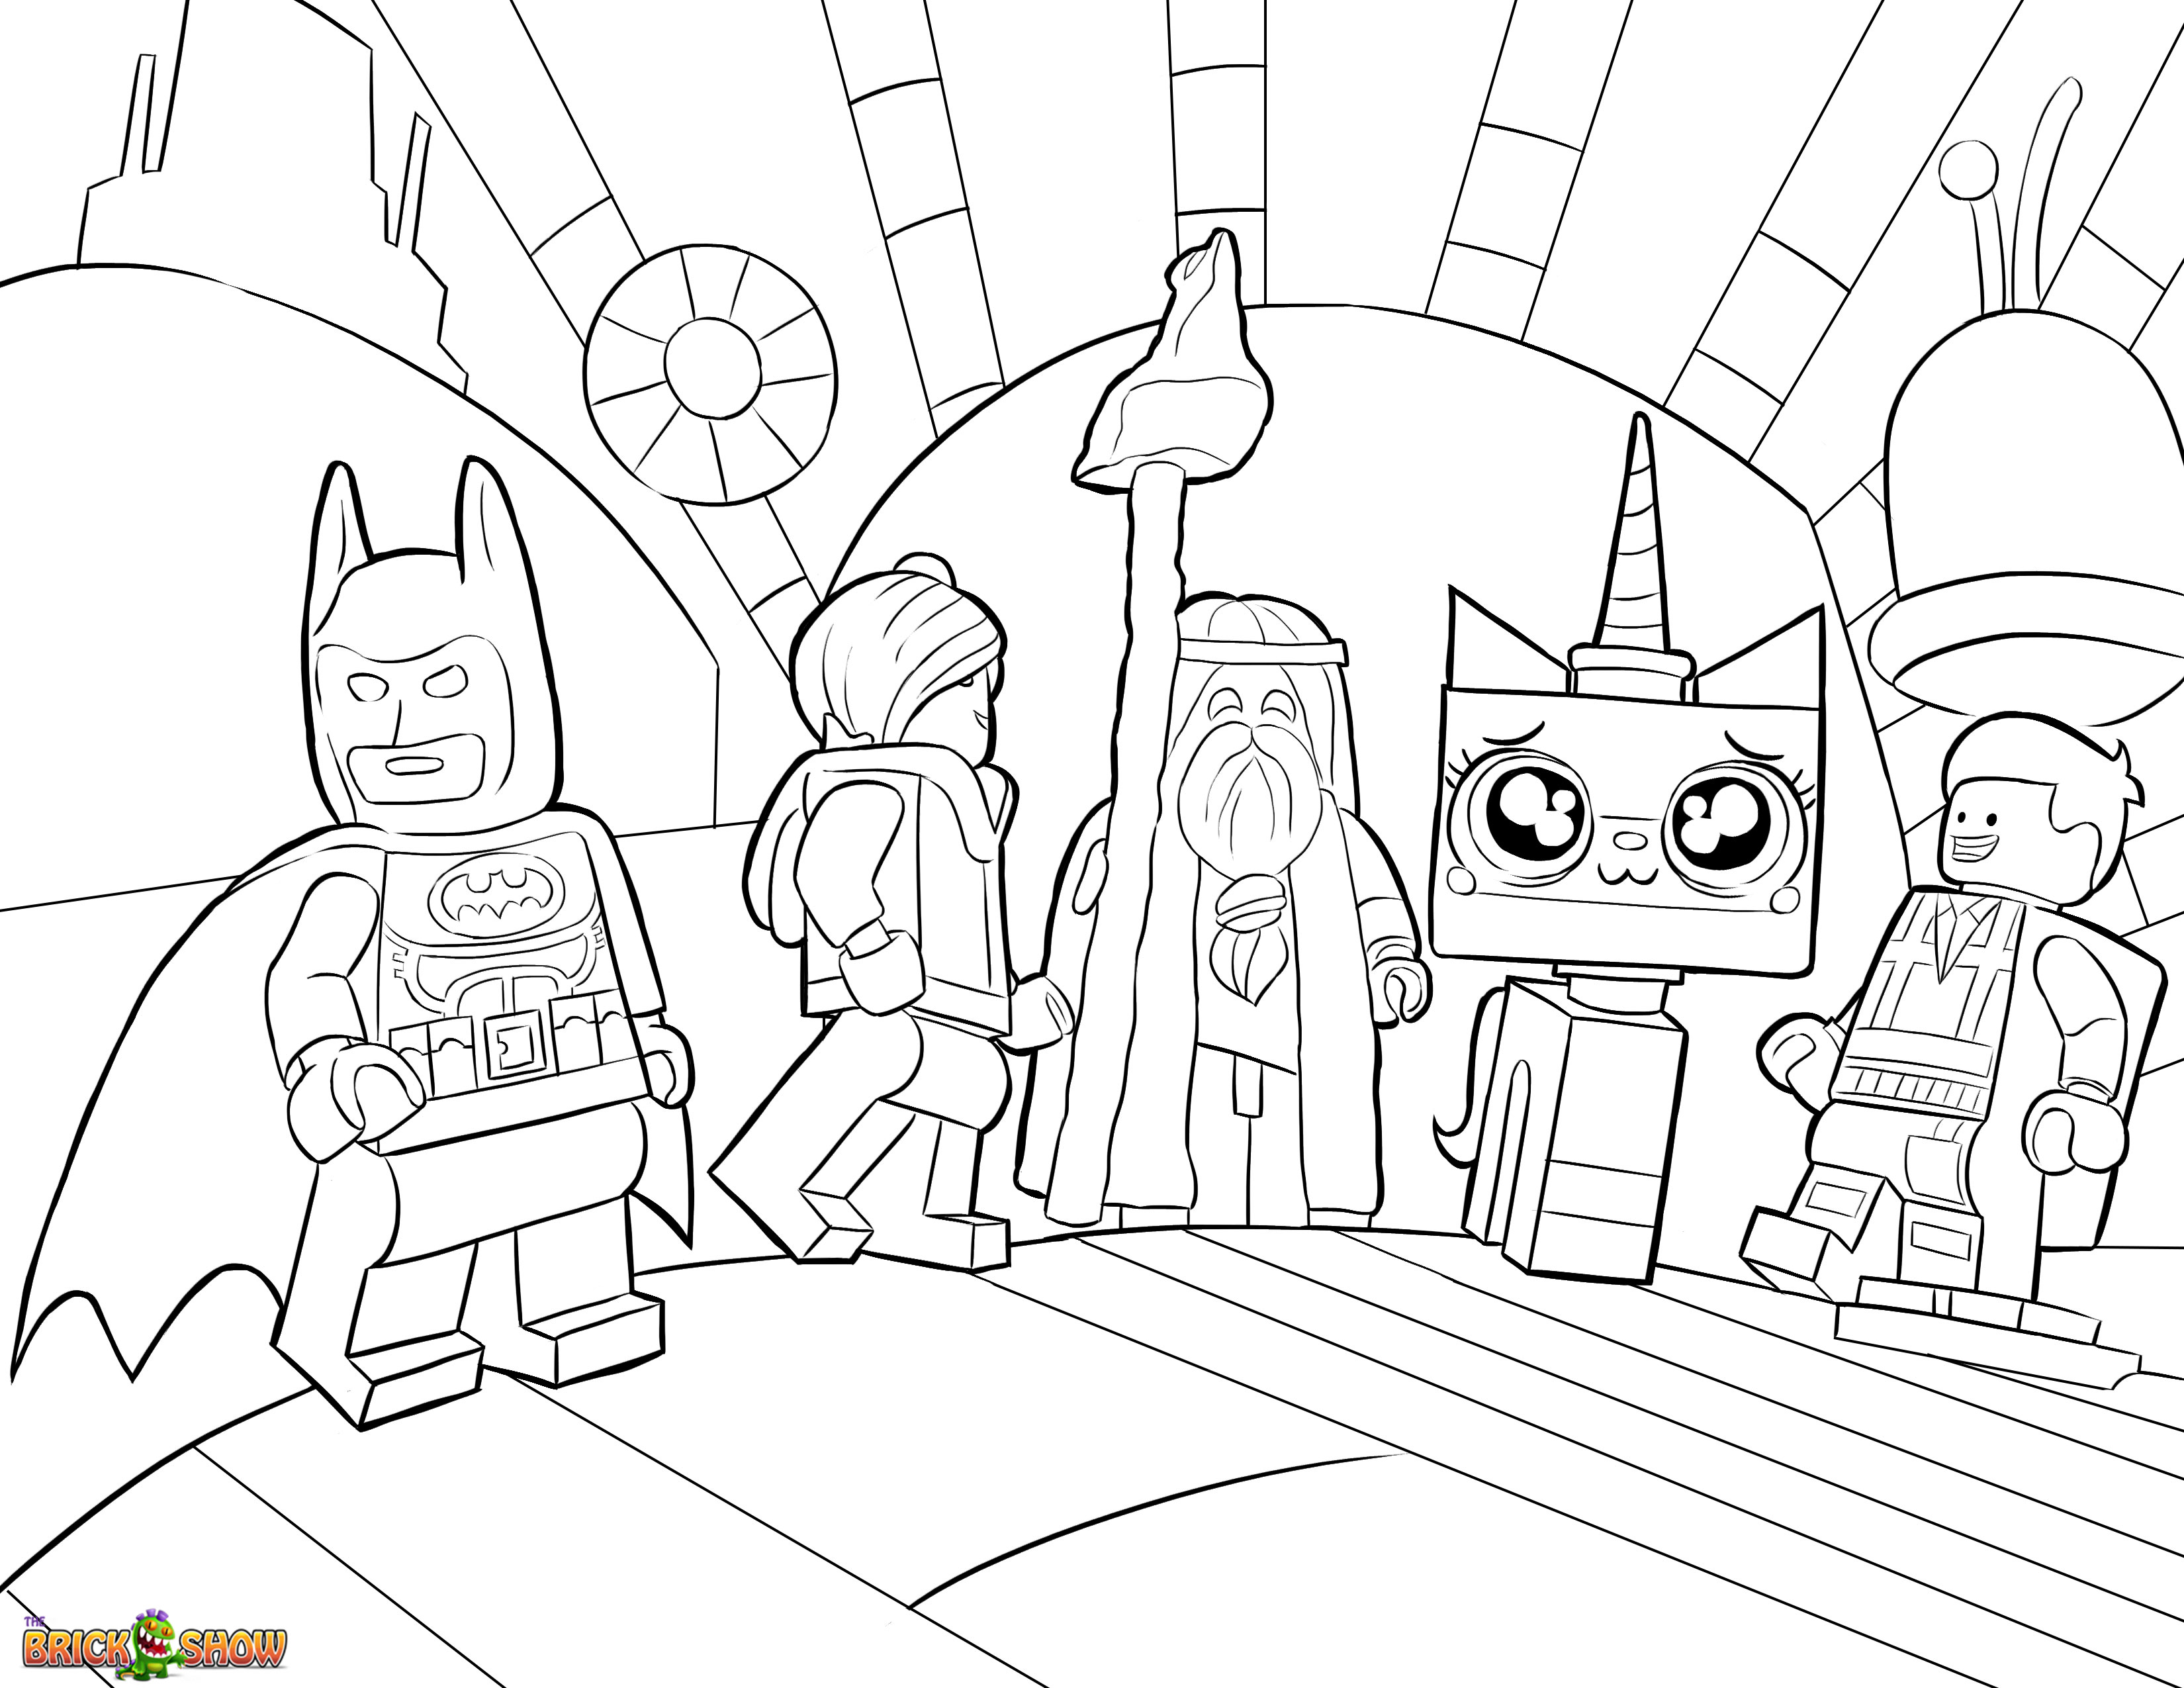 Lego Block Coloring Pages at GetColorings.com | Free printable ...